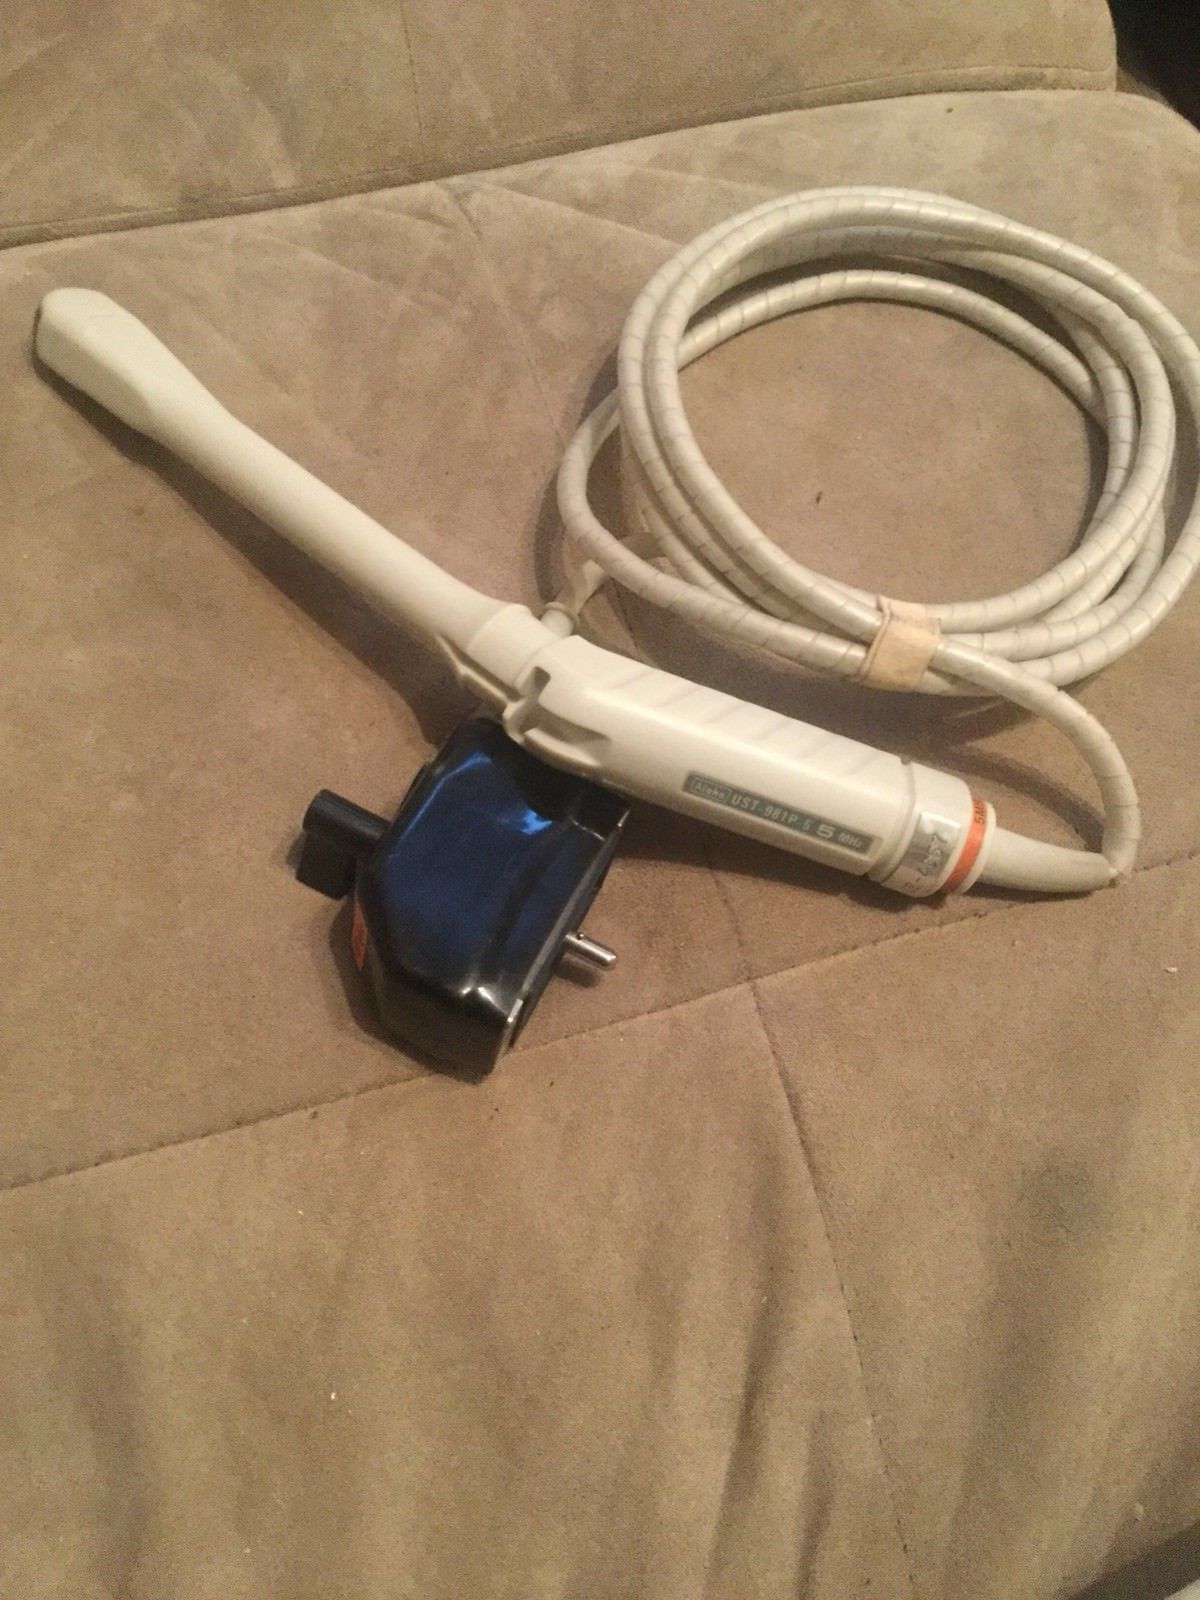 Aloka Microconvex Endocavitary Ultrasound Probe UST-981P-5,Used, see description DIAGNOSTIC ULTRASOUND MACHINES FOR SALE